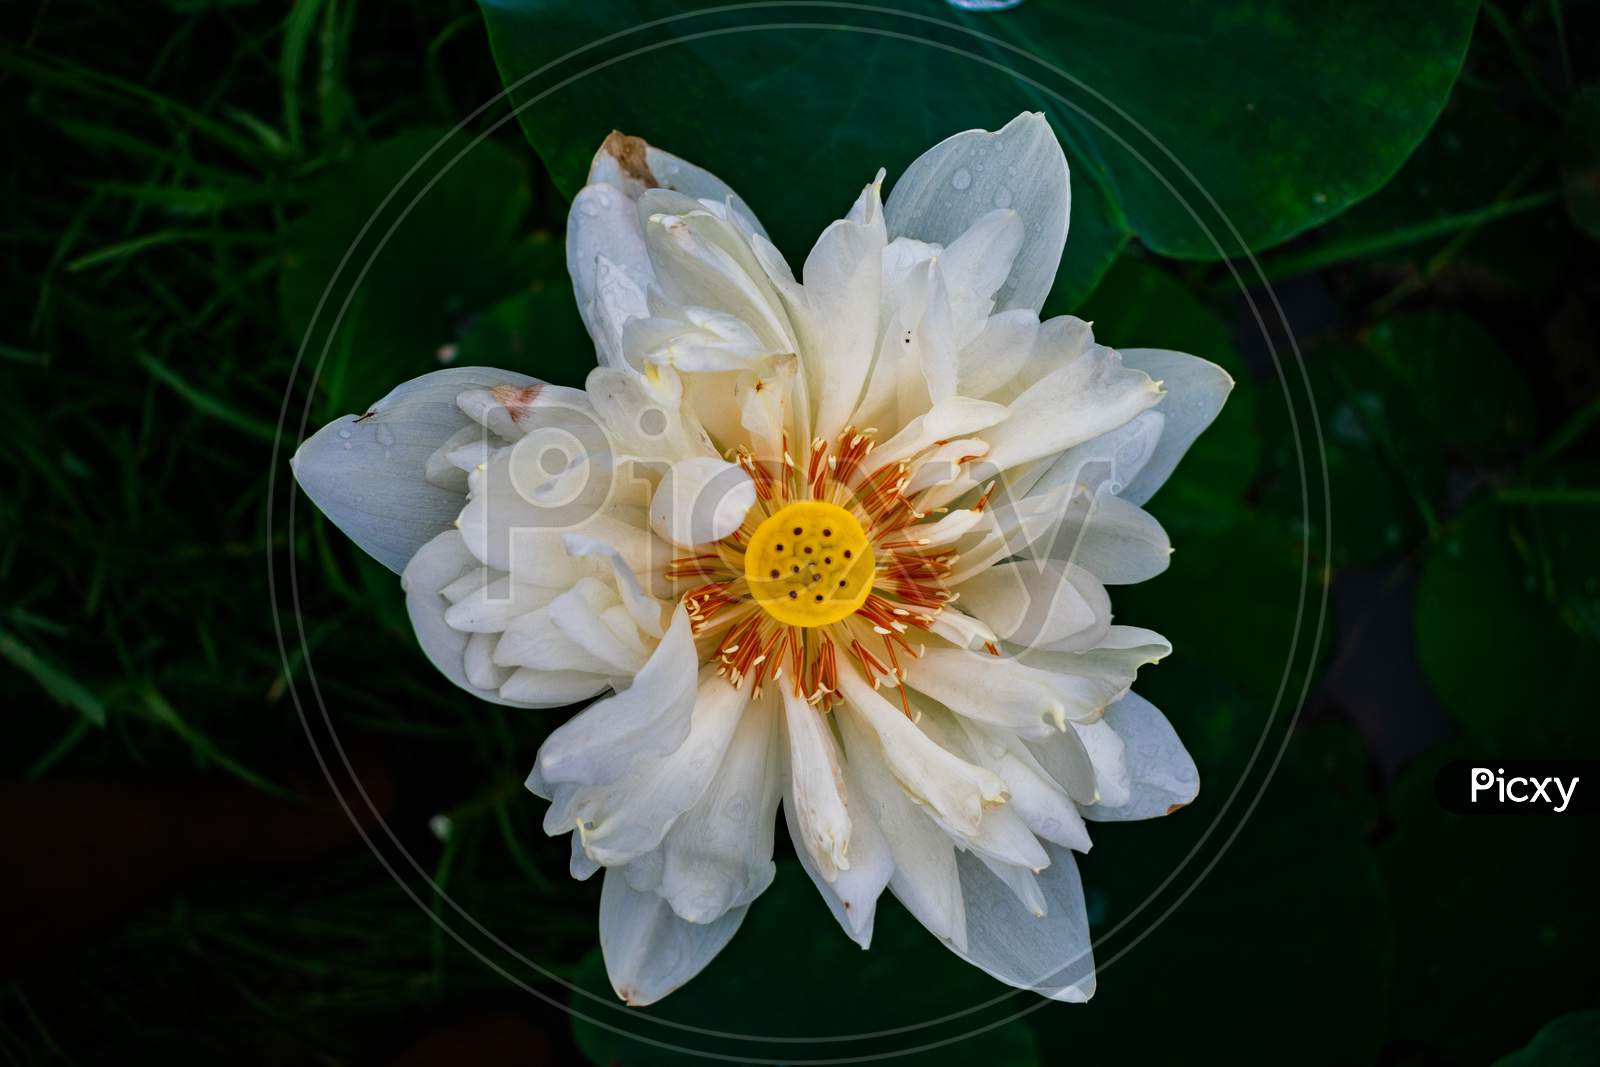 WHITE EGYPTIAN LILY BLOOMED  ON A LAKE SURFACE SURROUNDED BY GREEN LEAVES